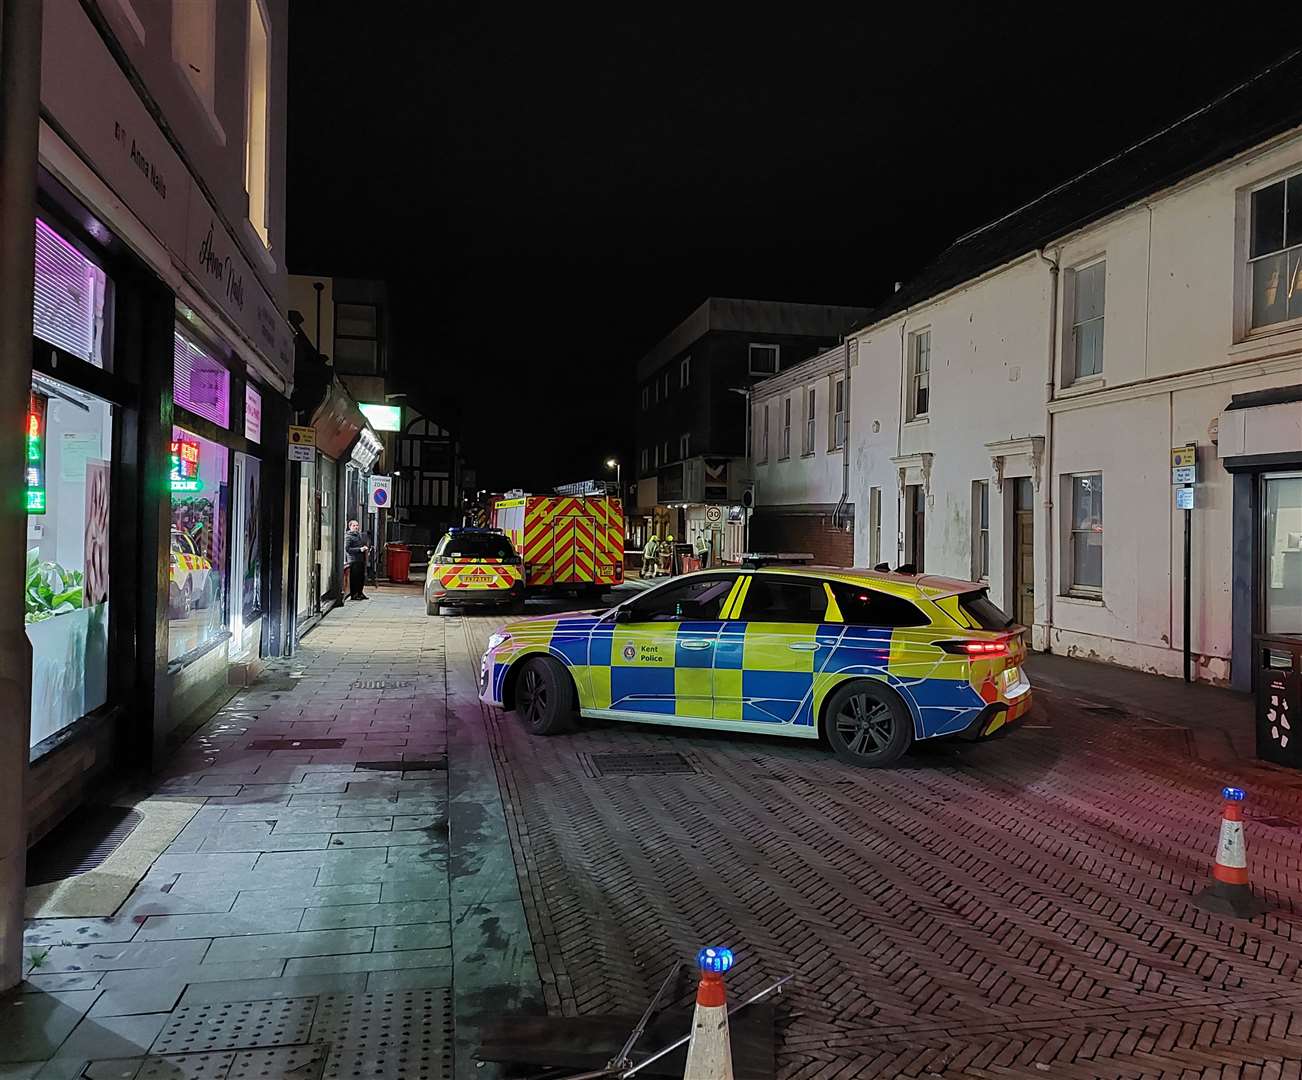 Police have closed off Tufton Street between Bank Street and Church Road in Ashford